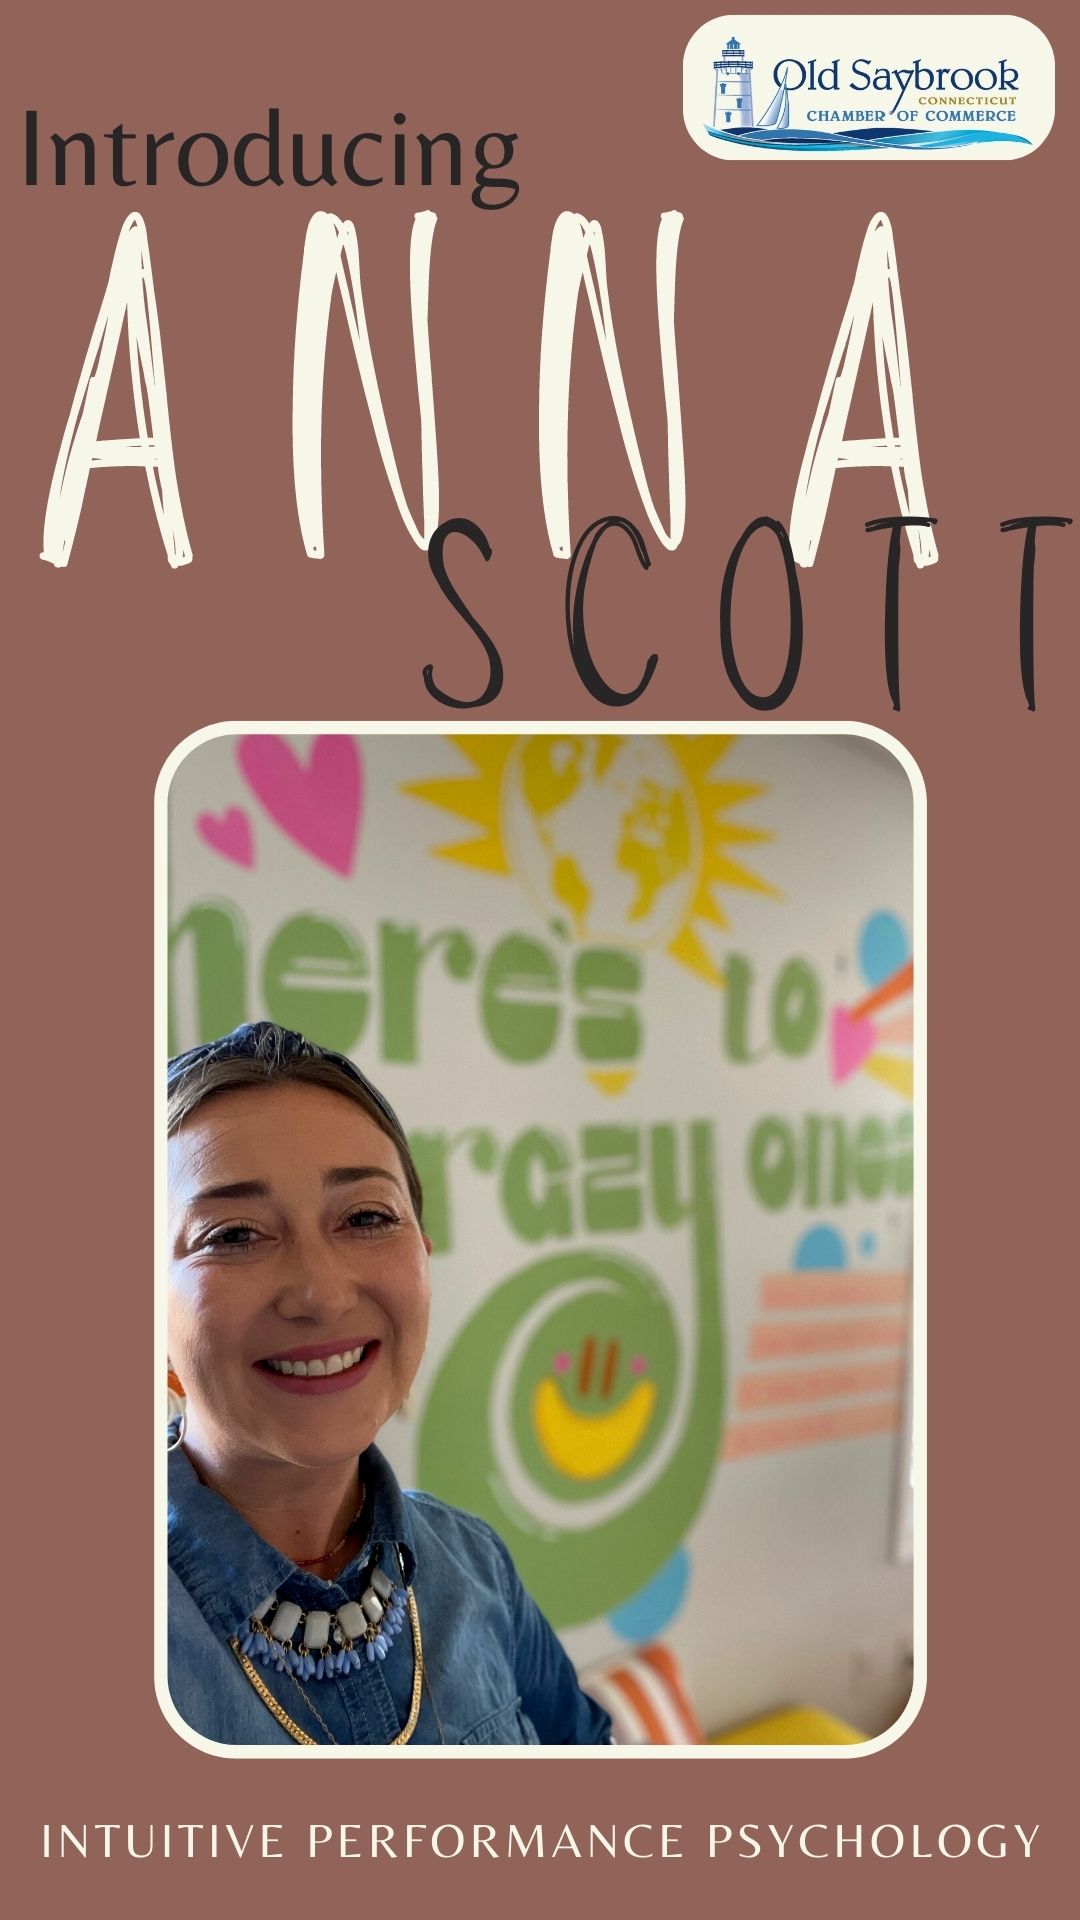 Image for Member Monday: Anna Scott of Intuitive Performance Psychology